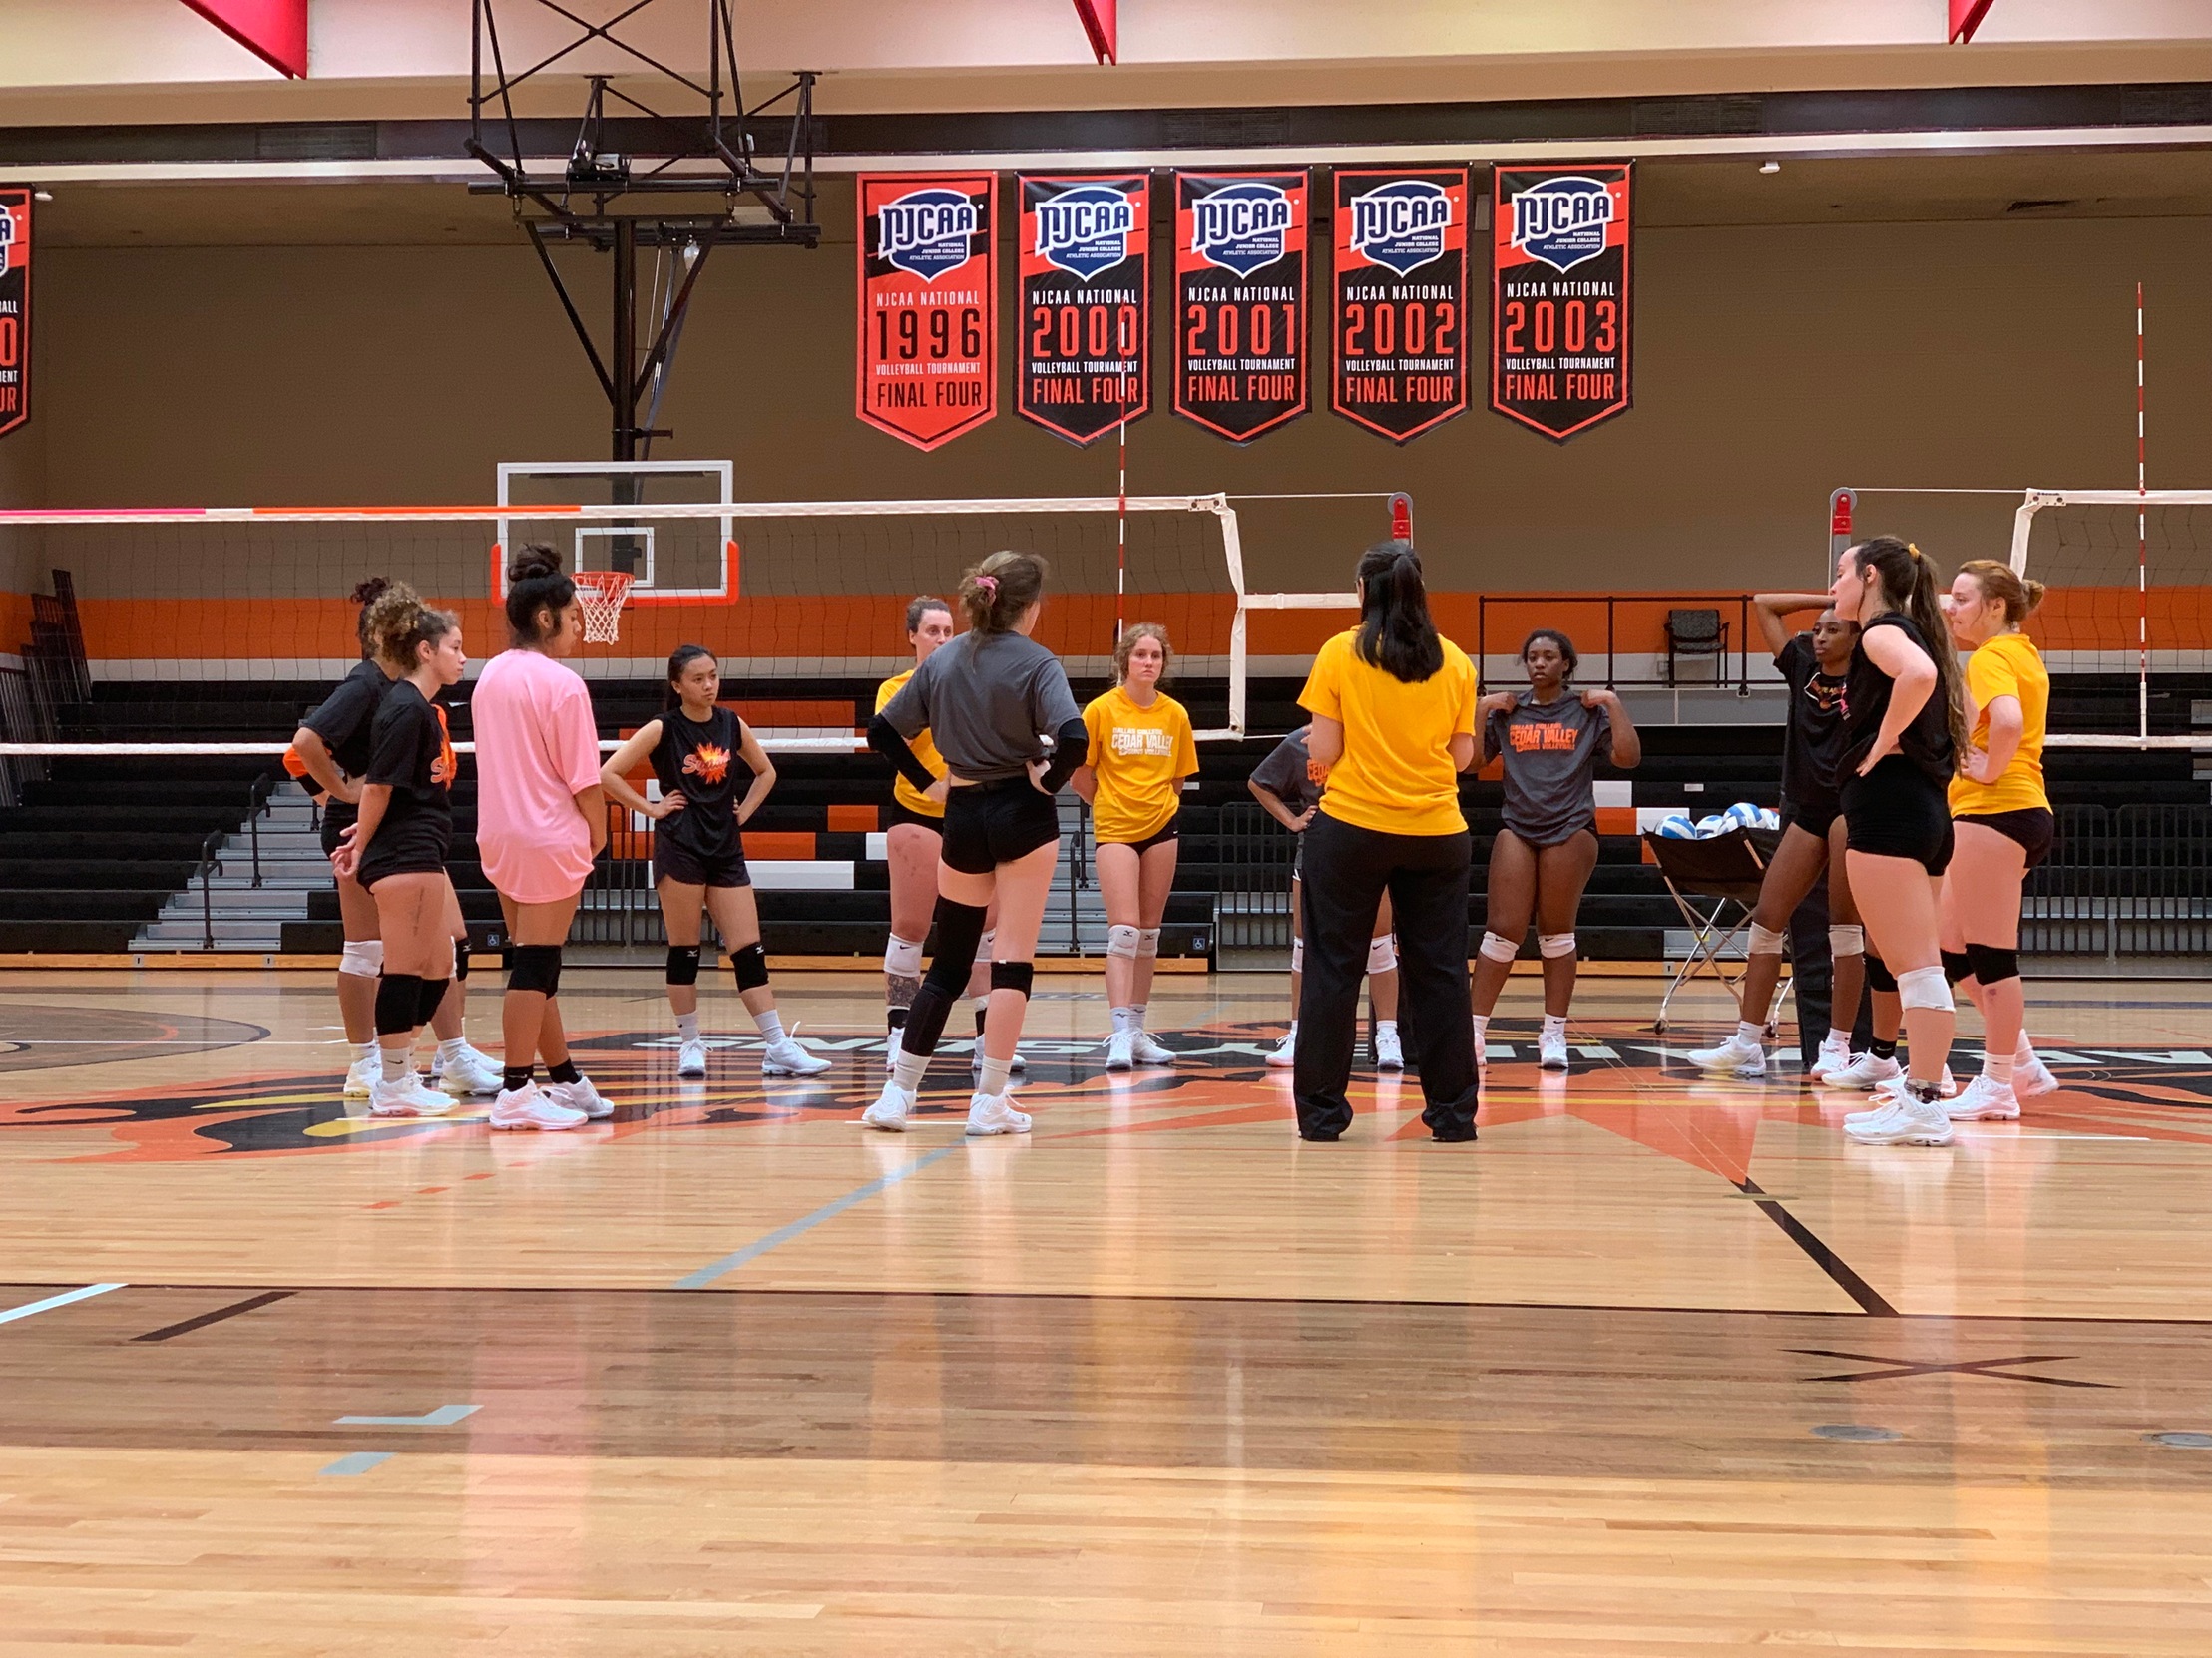 LADY SUNS VOLLEYBALL CONCLUDED THEIR 2021 PRESEASON CAMP